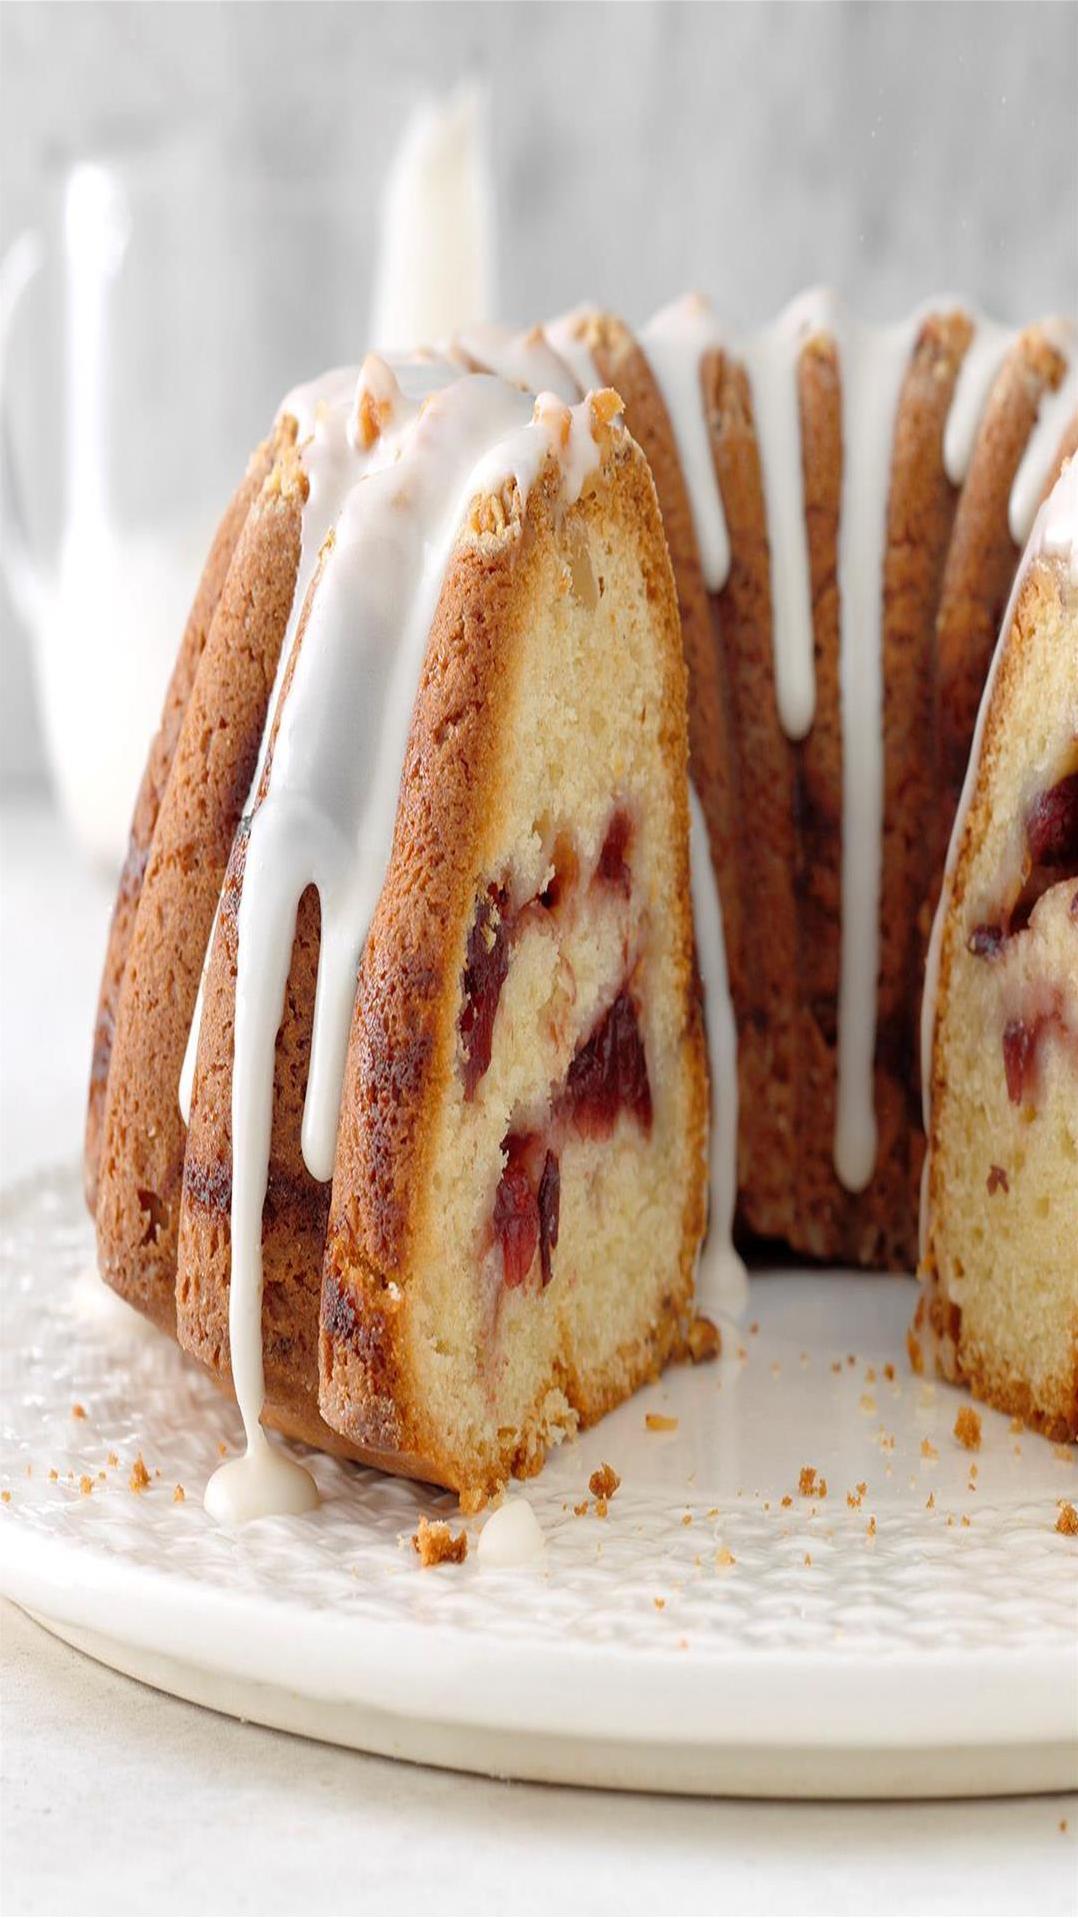  The aroma of warm cinnamon, nutmeg and sugar will fill your home as you bake this cake